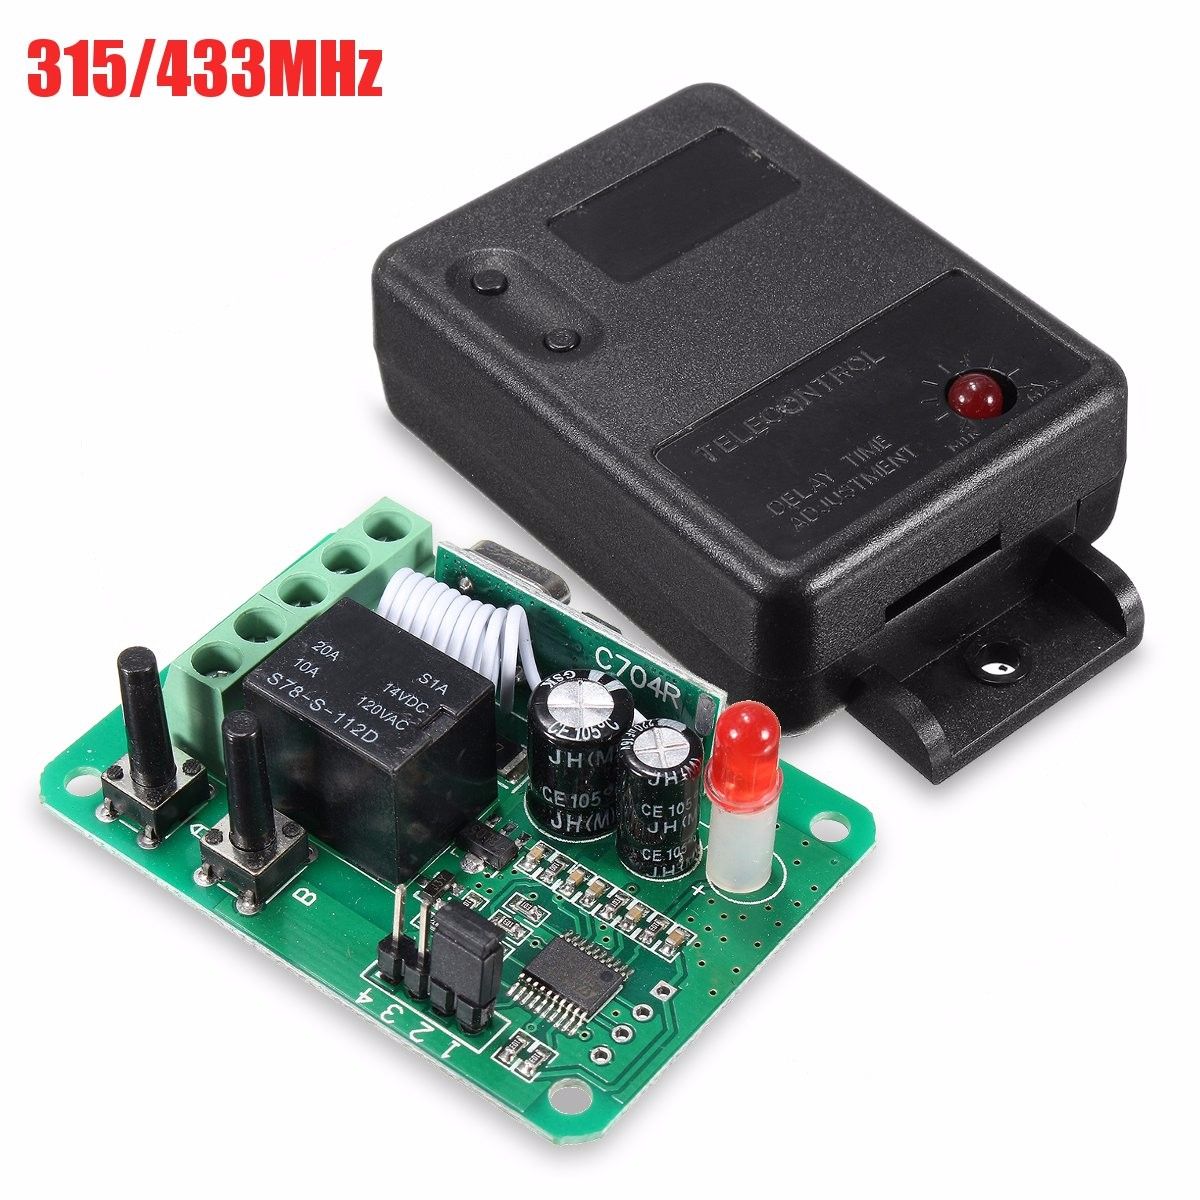 DC12V-1CH-315433MHz-Wireless-Time-Delay-Relay-RF-Remote-Control-Switch-Receiver-1150044